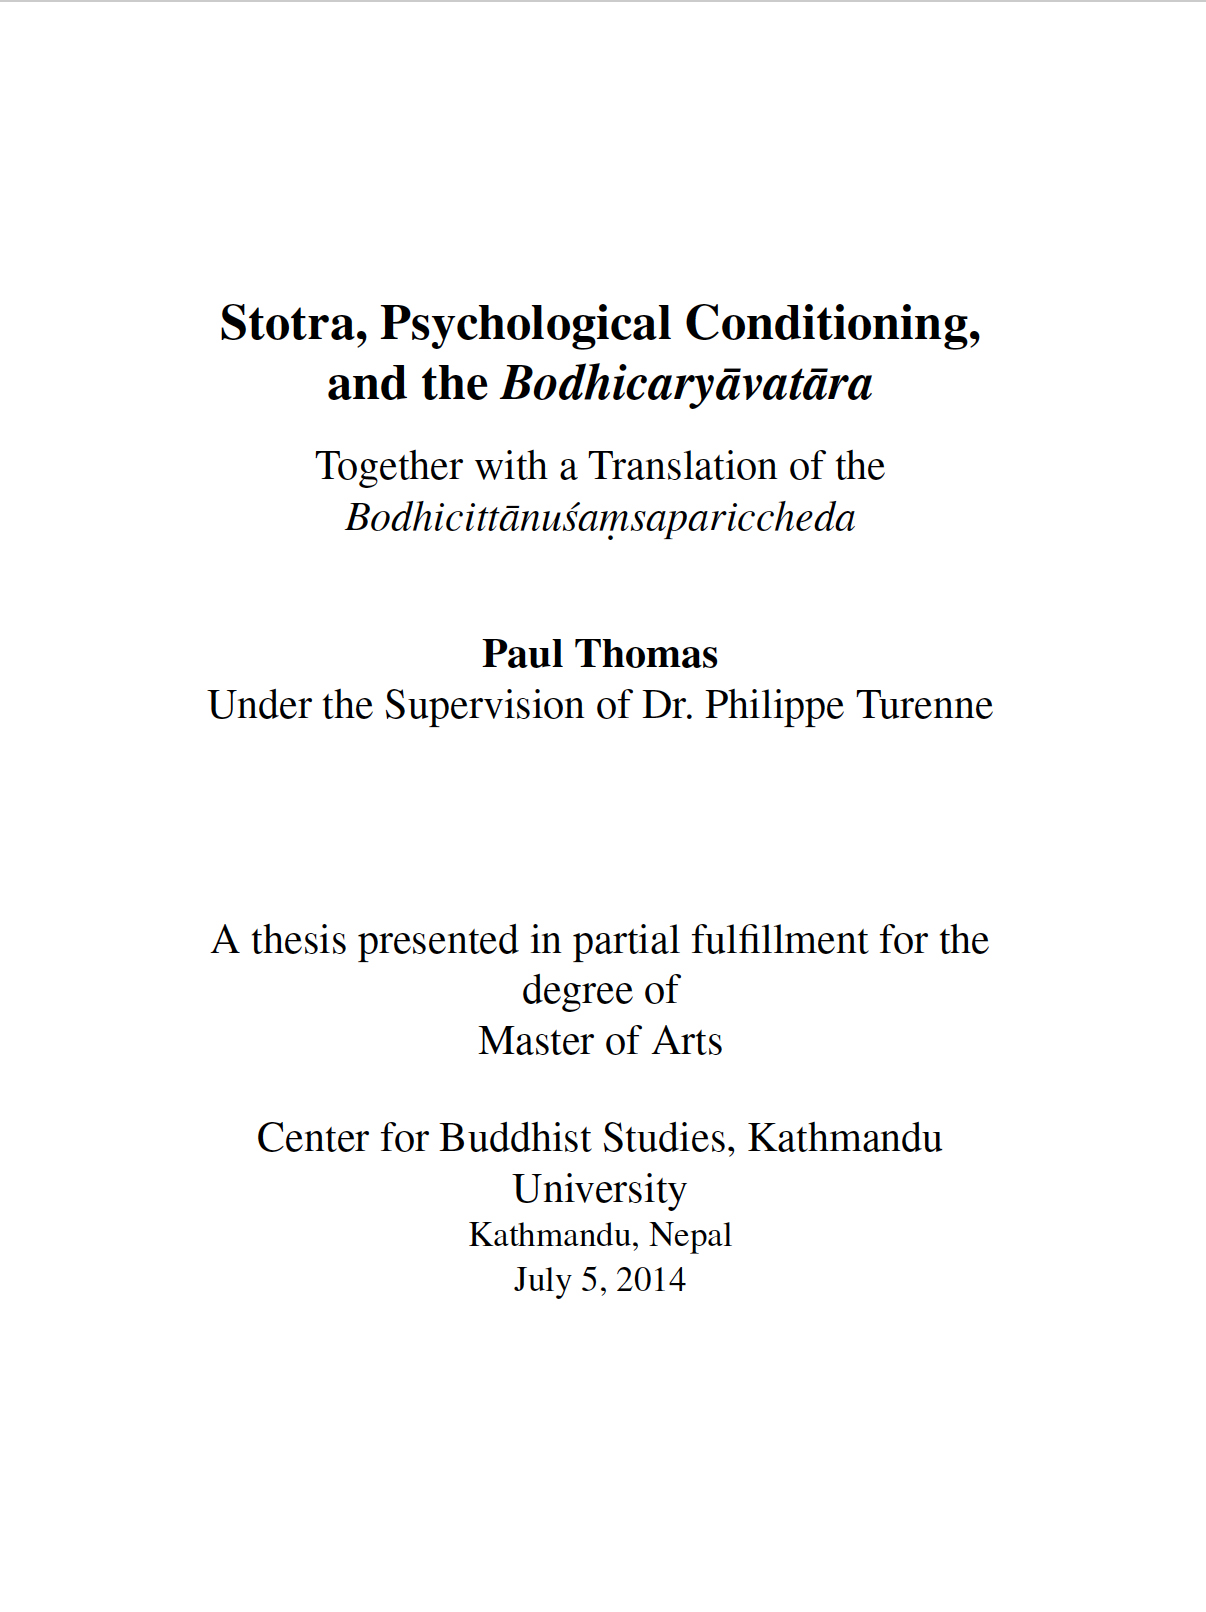 Stotra Psychological Conditioning and the Bodhicaryāvatāra- Together with a Translation of the Bodhicittānuśaṃsapariccheda-front.jpg